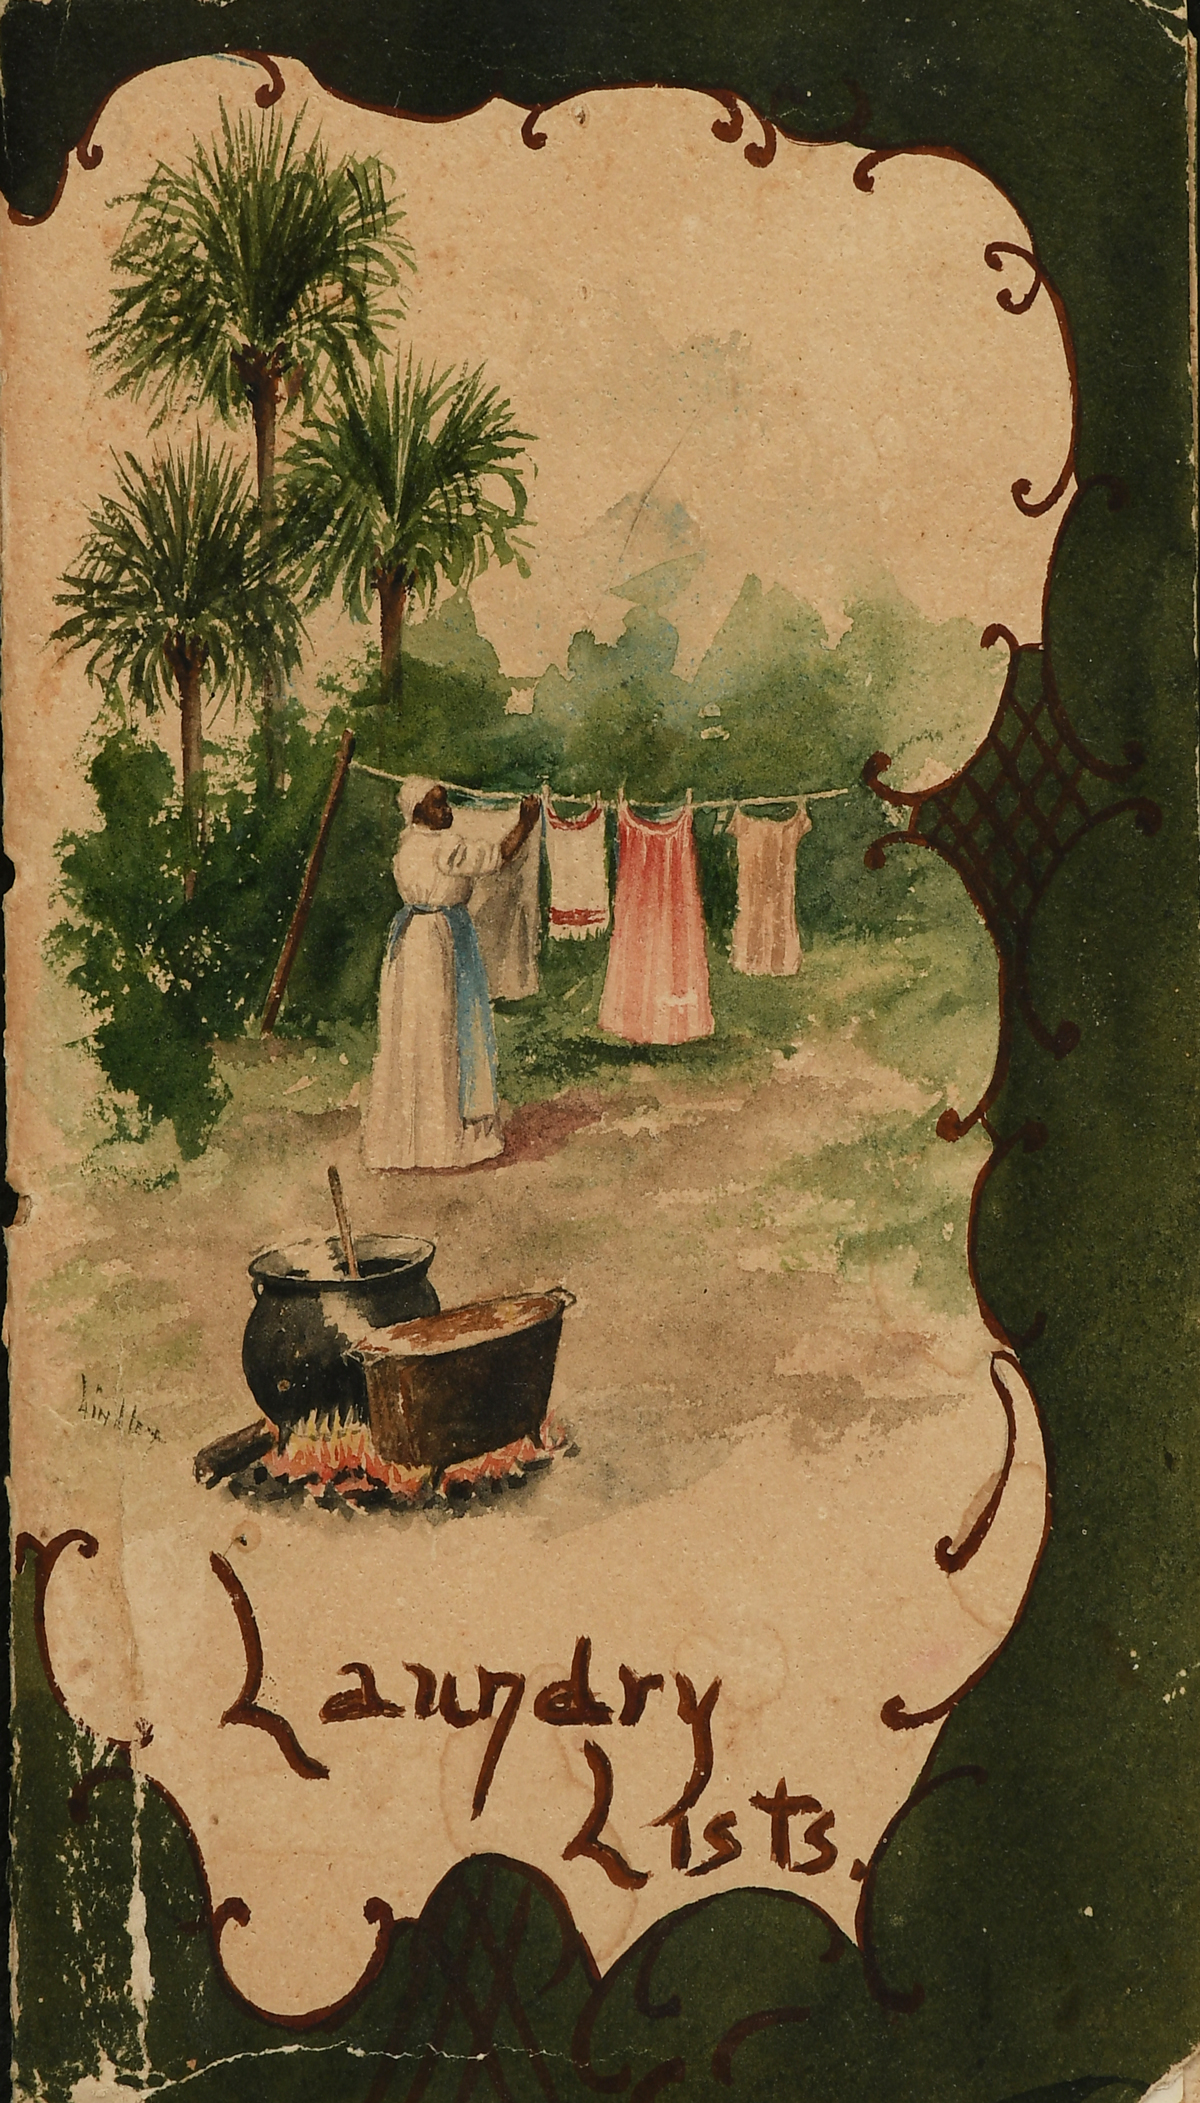 TWO FLORIDA PAINTINGS 1 Laundry 2761f7